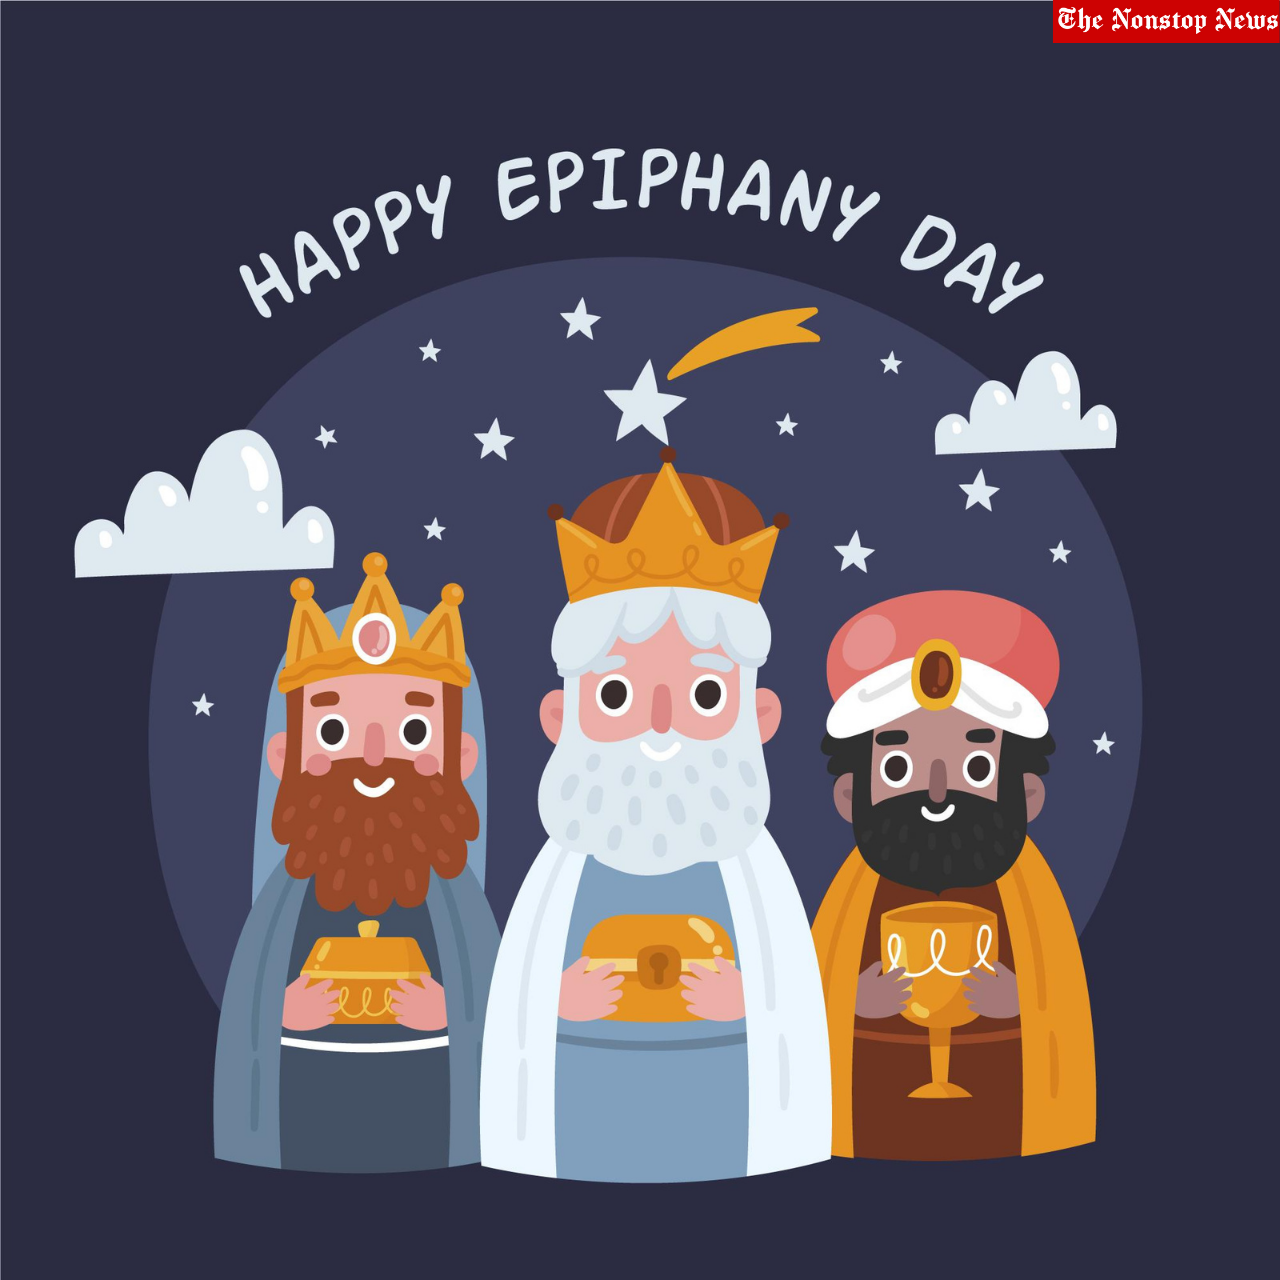 Epiphany Day 2022 Quotes, Wishes, Sayings, Messages, Greetings to share